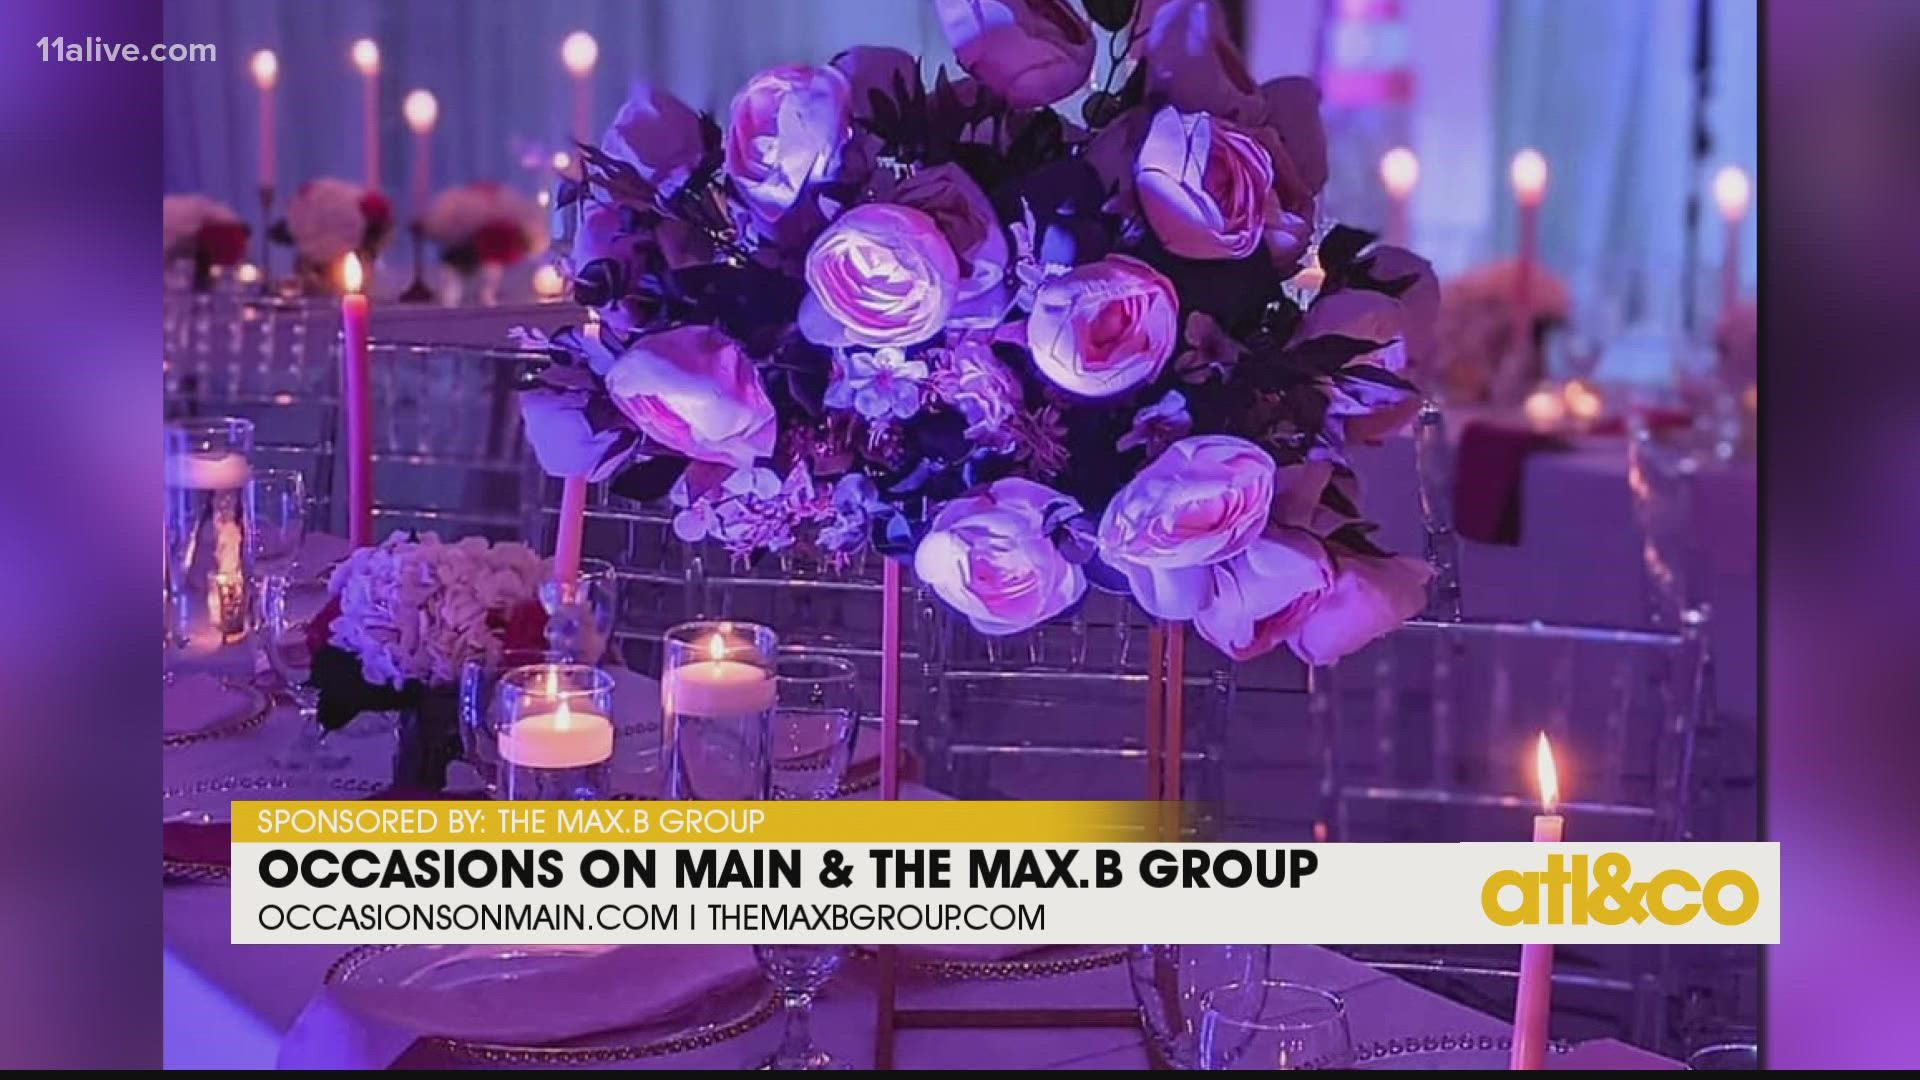 Book your celebration with Occasions on Main and The Max.B Group! Their team of event planners create luxury weddings, corporate galas, and more.